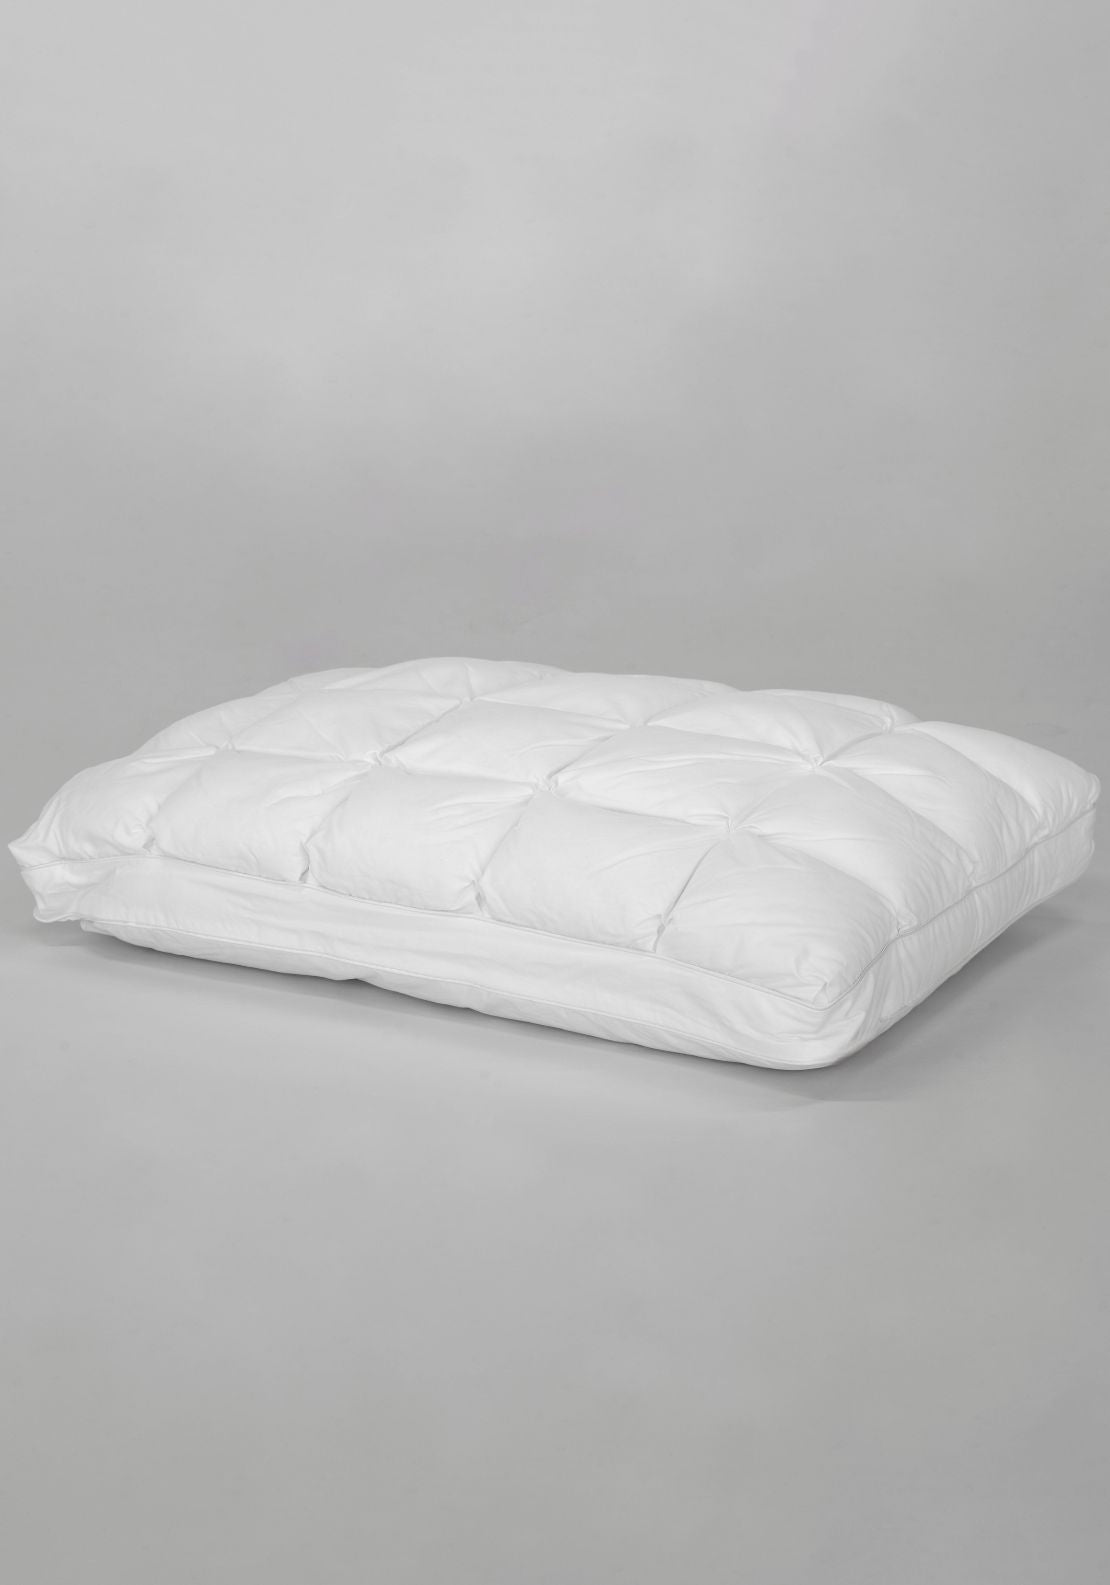 The Home Luxury Collection Never Go Flat Pillow - White 2 Shaws Department Stores